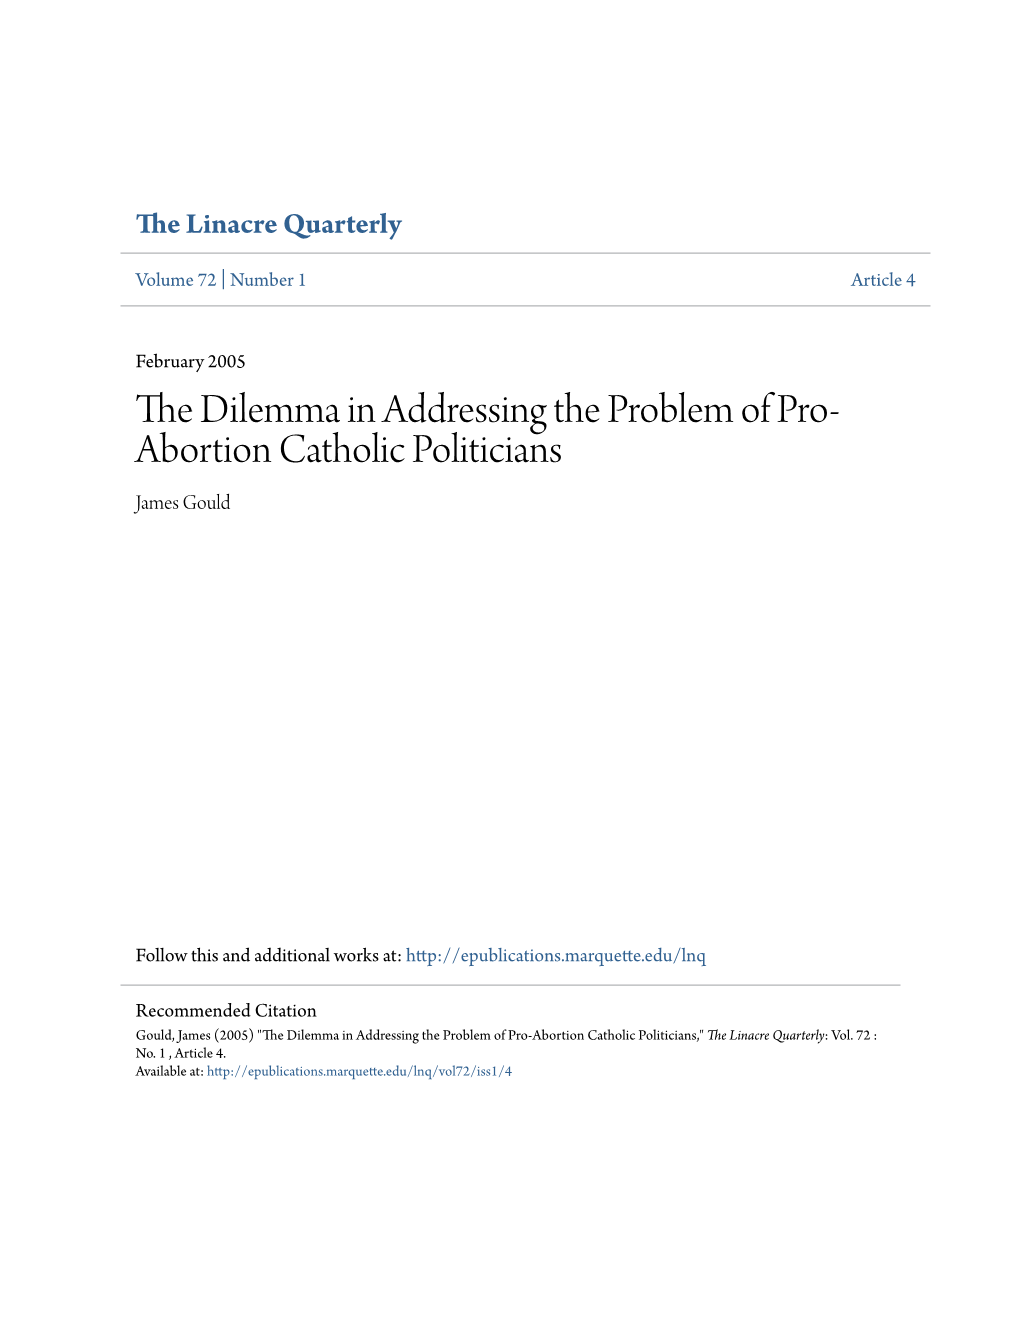 The Dilemma in Addressing the Problem of Pro-Abortion Catholic Politicians," the Linacre Quarterly: Vol